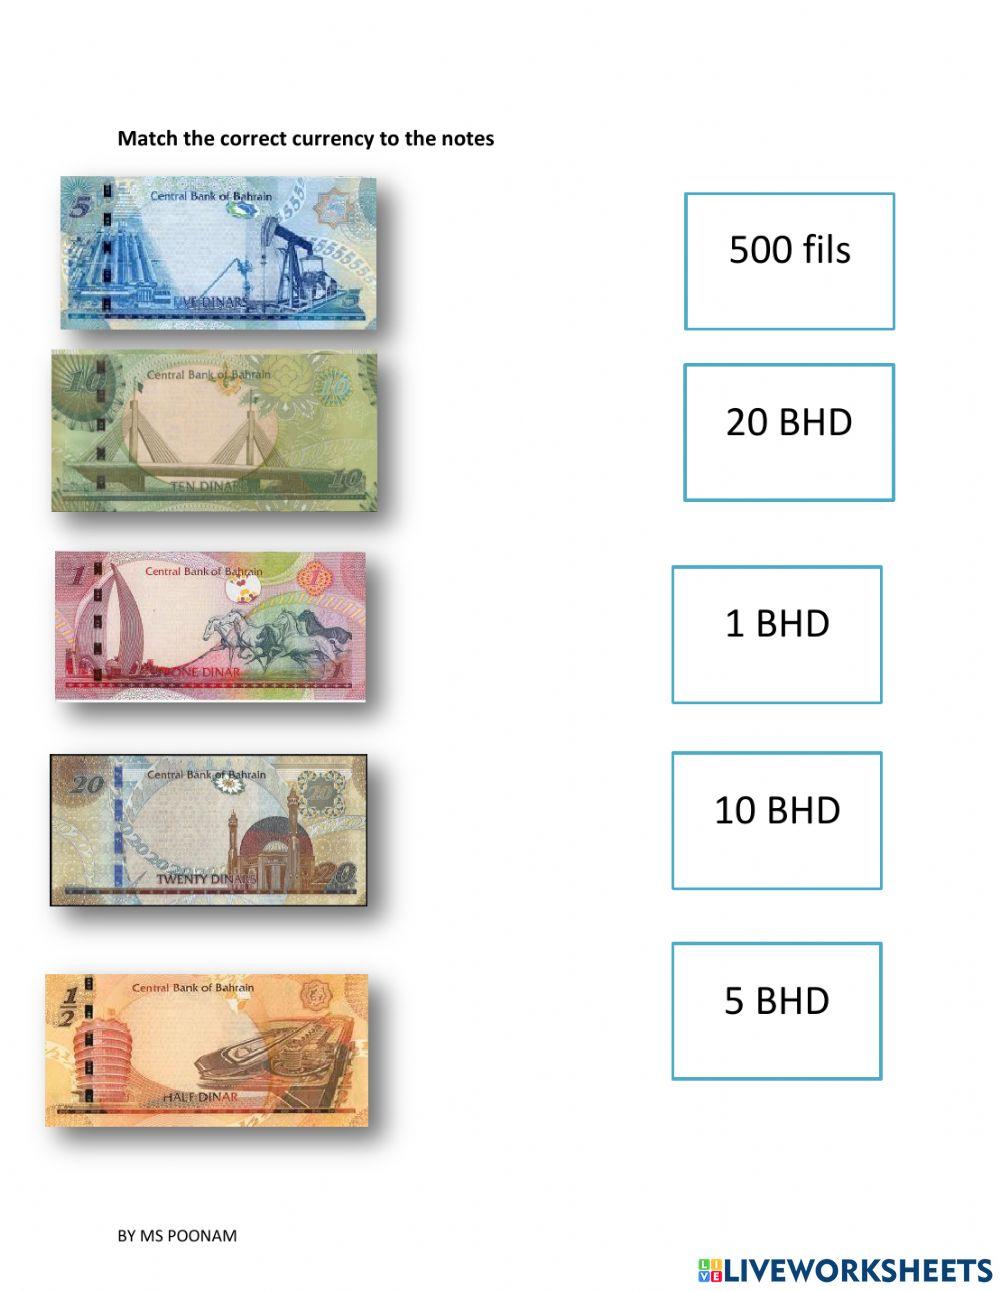 Bahrain Currency